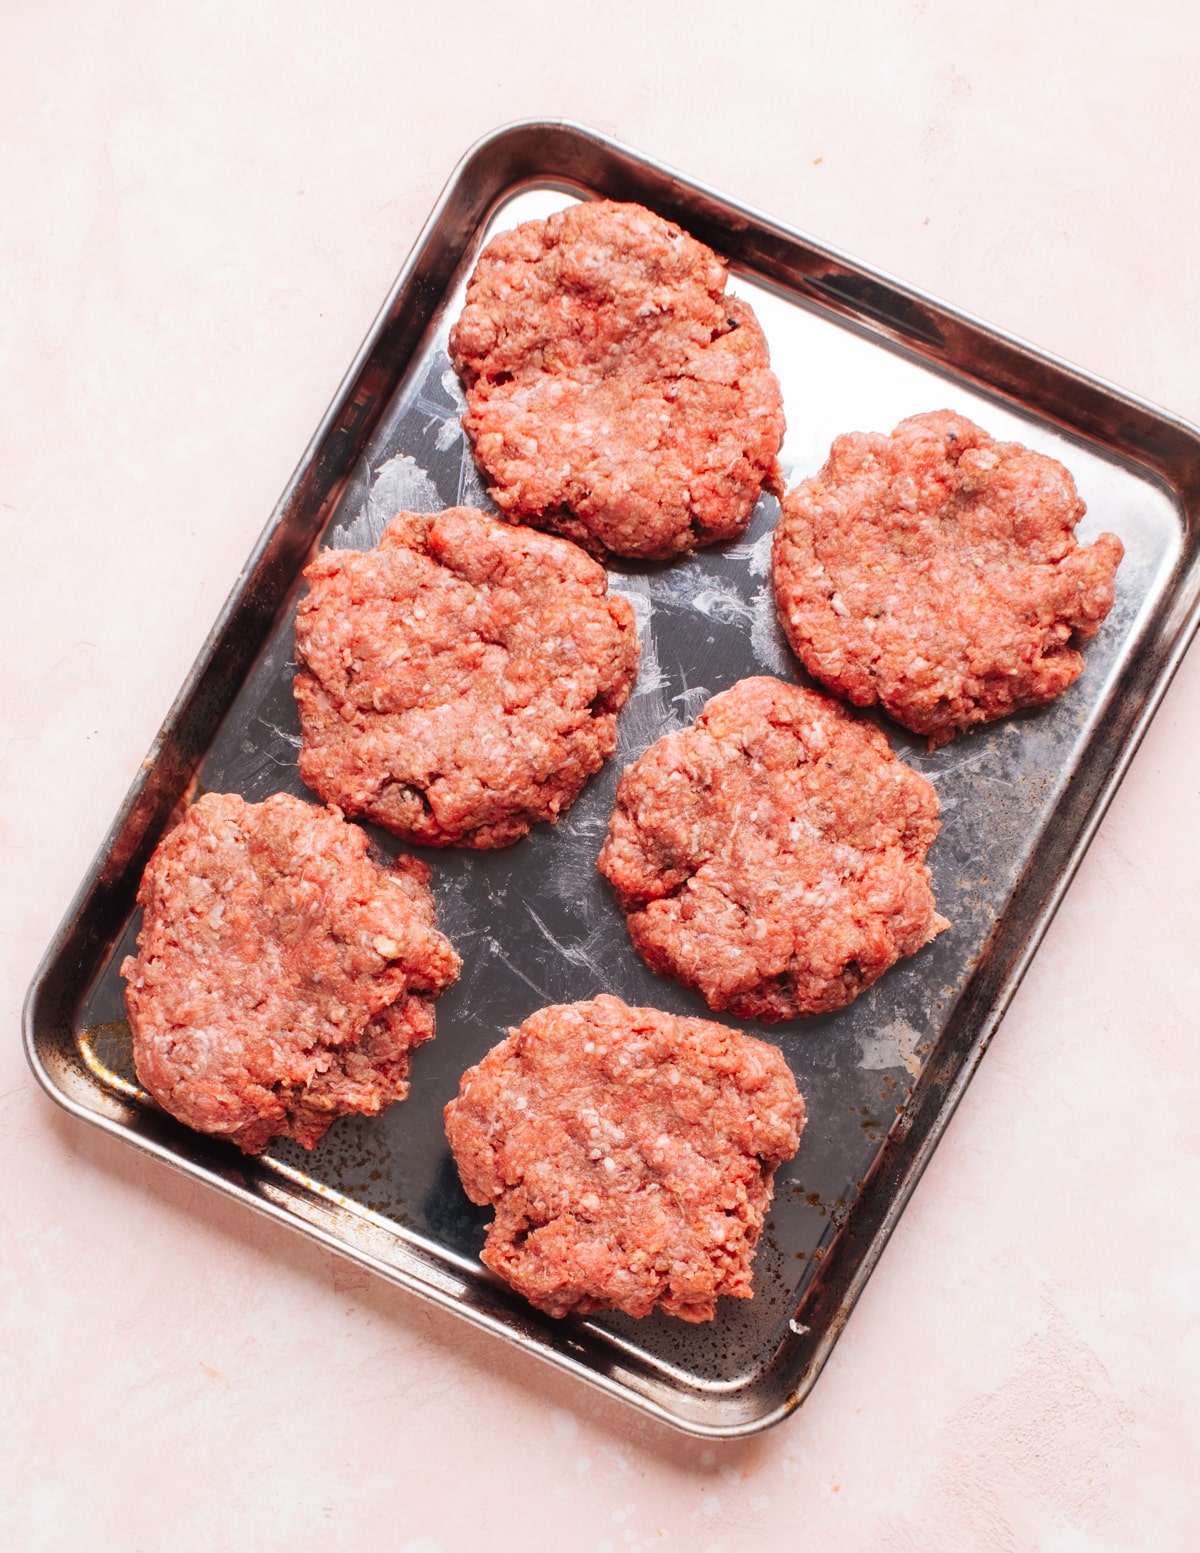 Raw ground beef patties on a tray.